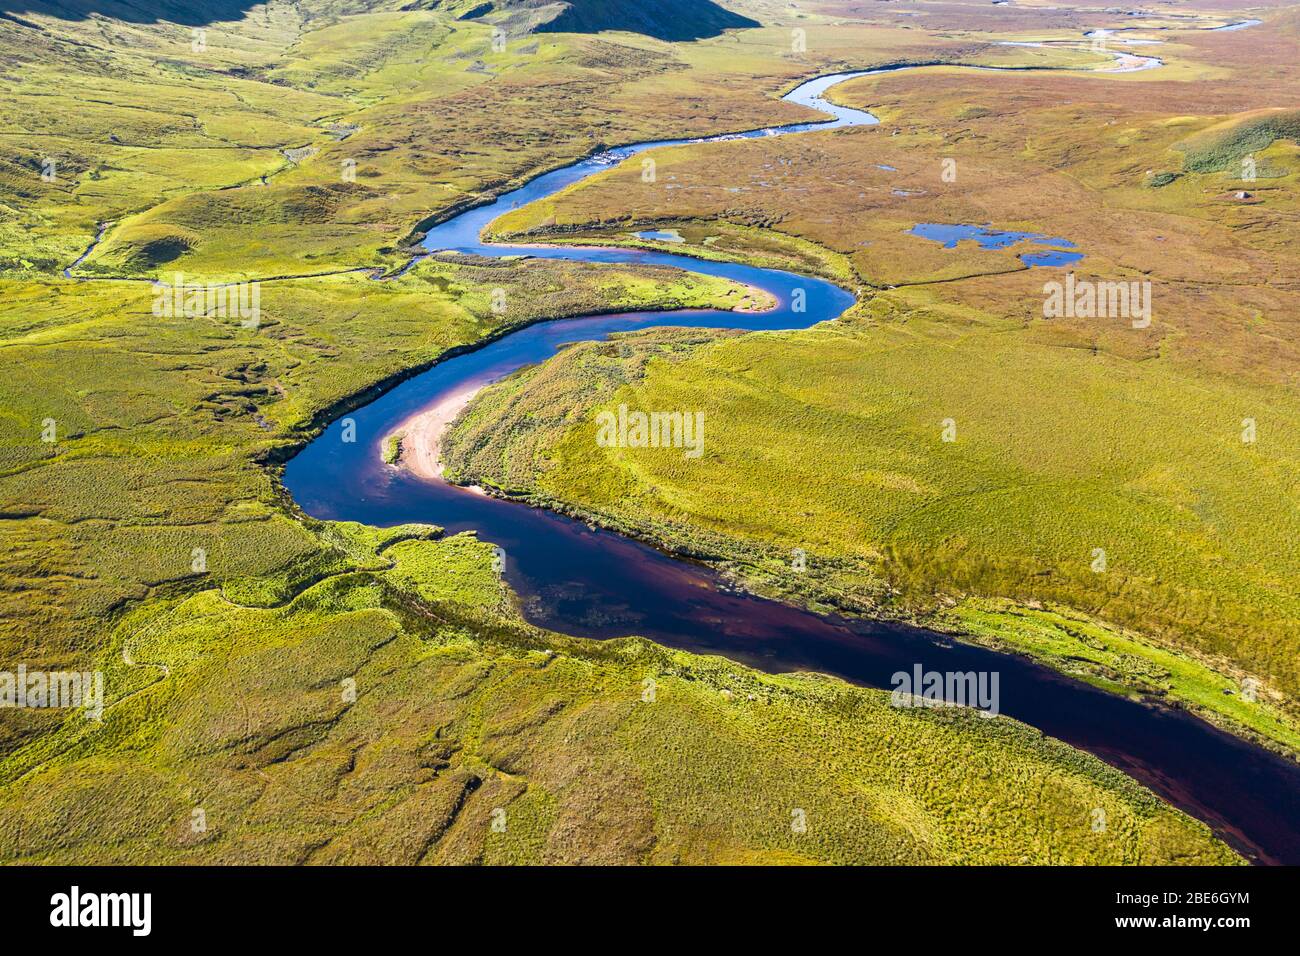 Drone shoot over s bend shape river across green valley by the Beinn Spionnaidh mountain at brigh autumnal day in the North West highlands of Scotland Stock Photo